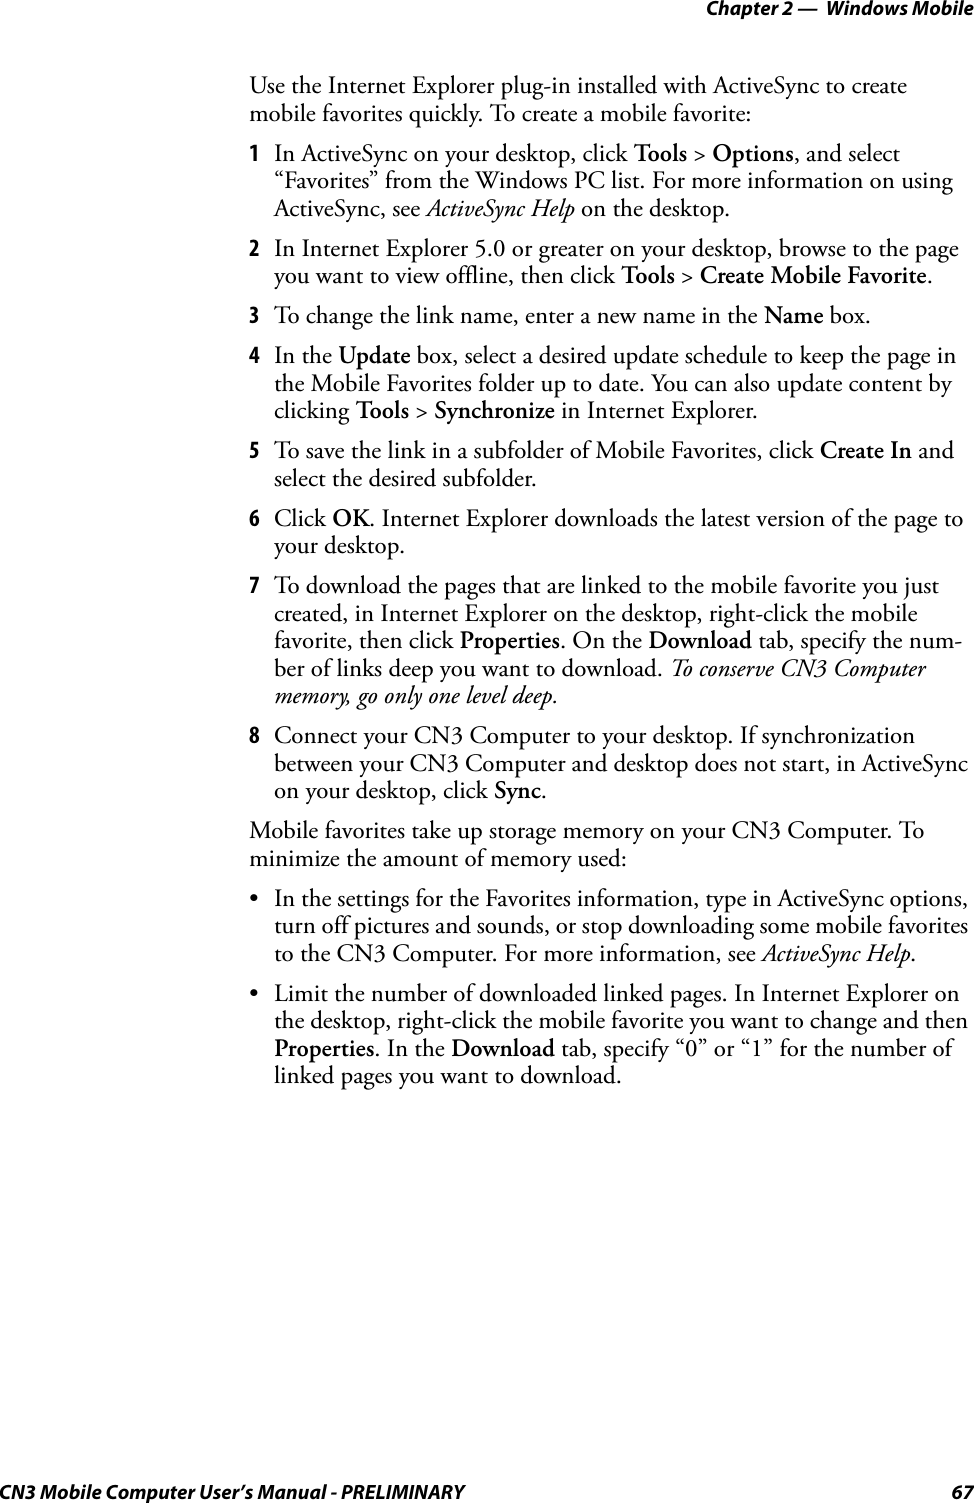 Chapter 2 —  Windows MobileCN3 Mobile Computer User’s Manual - PRELIMINARY 67Use the Internet Explorer plug-in installed with ActiveSync to create mobile favorites quickly. To create a mobile favorite:1In ActiveSync on your desktop, click To o l s  &gt; Options, and select “Favorites” from the Windows PC list. For more information on using ActiveSync, see ActiveSync Help on the desktop.2In Internet Explorer 5.0 or greater on your desktop, browse to the page you want to view offline, then click Too l s &gt; Create Mobile Favorite.3To change the link name, enter a new name in the Name box.4In the Update box, select a desired update schedule to keep the page in the Mobile Favorites folder up to date. You can also update content by clicking Tools &gt; Synchronize in Internet Explorer.5To save the link in a subfolder of Mobile Favorites, click Create In and select the desired subfolder.6Click OK. Internet Explorer downloads the latest version of the page to your desktop.7To download the pages that are linked to the mobile favorite you just created, in Internet Explorer on the desktop, right-click the mobile favorite, then click Properties. On the Download tab, specify the num-ber of links deep you want to download. To conserve CN3 Computer memory, go only one level deep.8Connect your CN3 Computer to your desktop. If synchronization between your CN3 Computer and desktop does not start, in ActiveSync on your desktop, click Sync.Mobile favorites take up storage memory on your CN3 Computer. To minimize the amount of memory used:• In the settings for the Favorites information, type in ActiveSync options, turn off pictures and sounds, or stop downloading some mobile favorites to the CN3 Computer. For more information, see ActiveSync Help.• Limit the number of downloaded linked pages. In Internet Explorer on the desktop, right-click the mobile favorite you want to change and then Properties. In the Download tab, specify “0” or “1” for the number of linked pages you want to download.